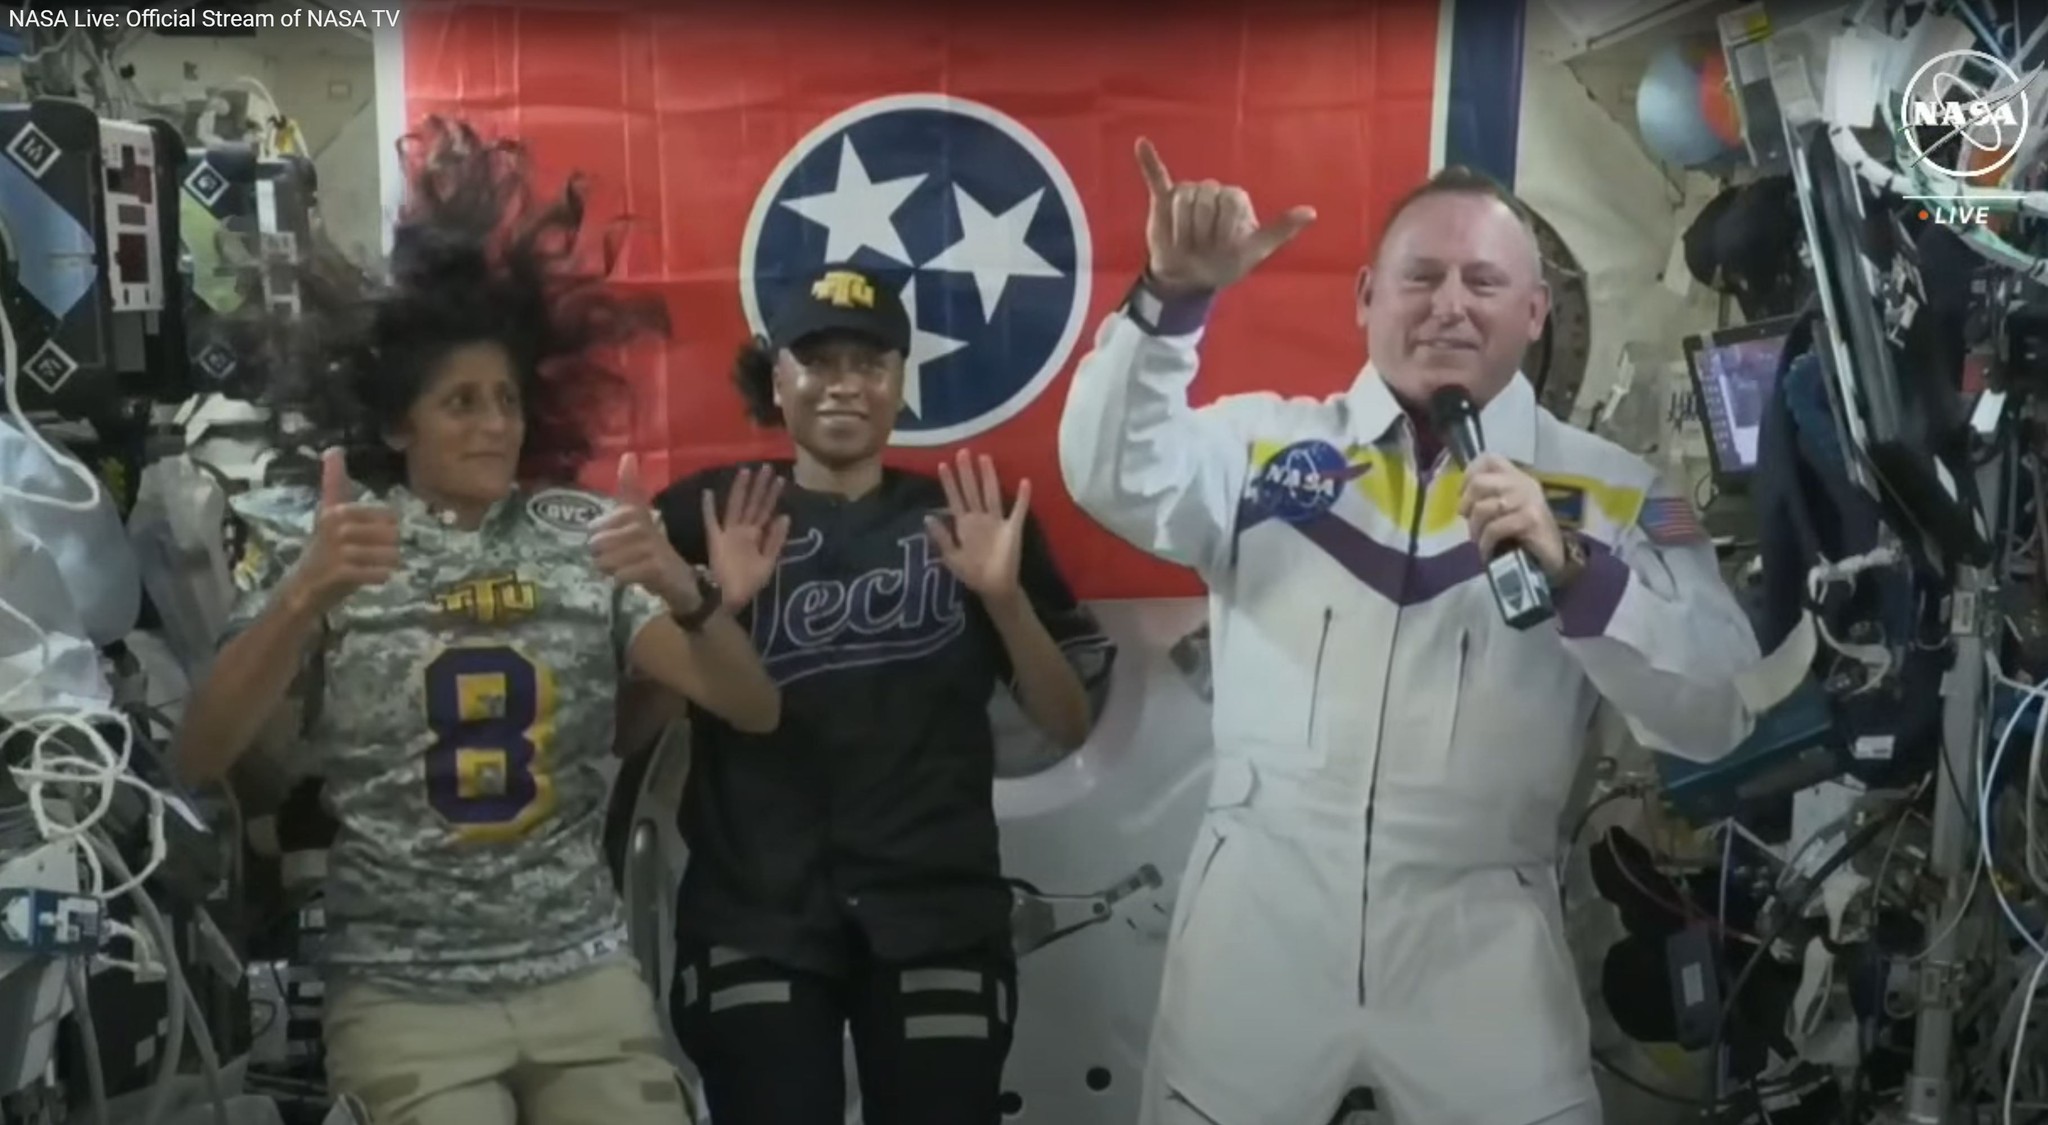 Astronauts Suni Williams and Jeanette Epps and don Tech football and baseball jerseys to show their support for Wilmore’s alma mater. Wilmore has purple and gold on his jumpsuit.